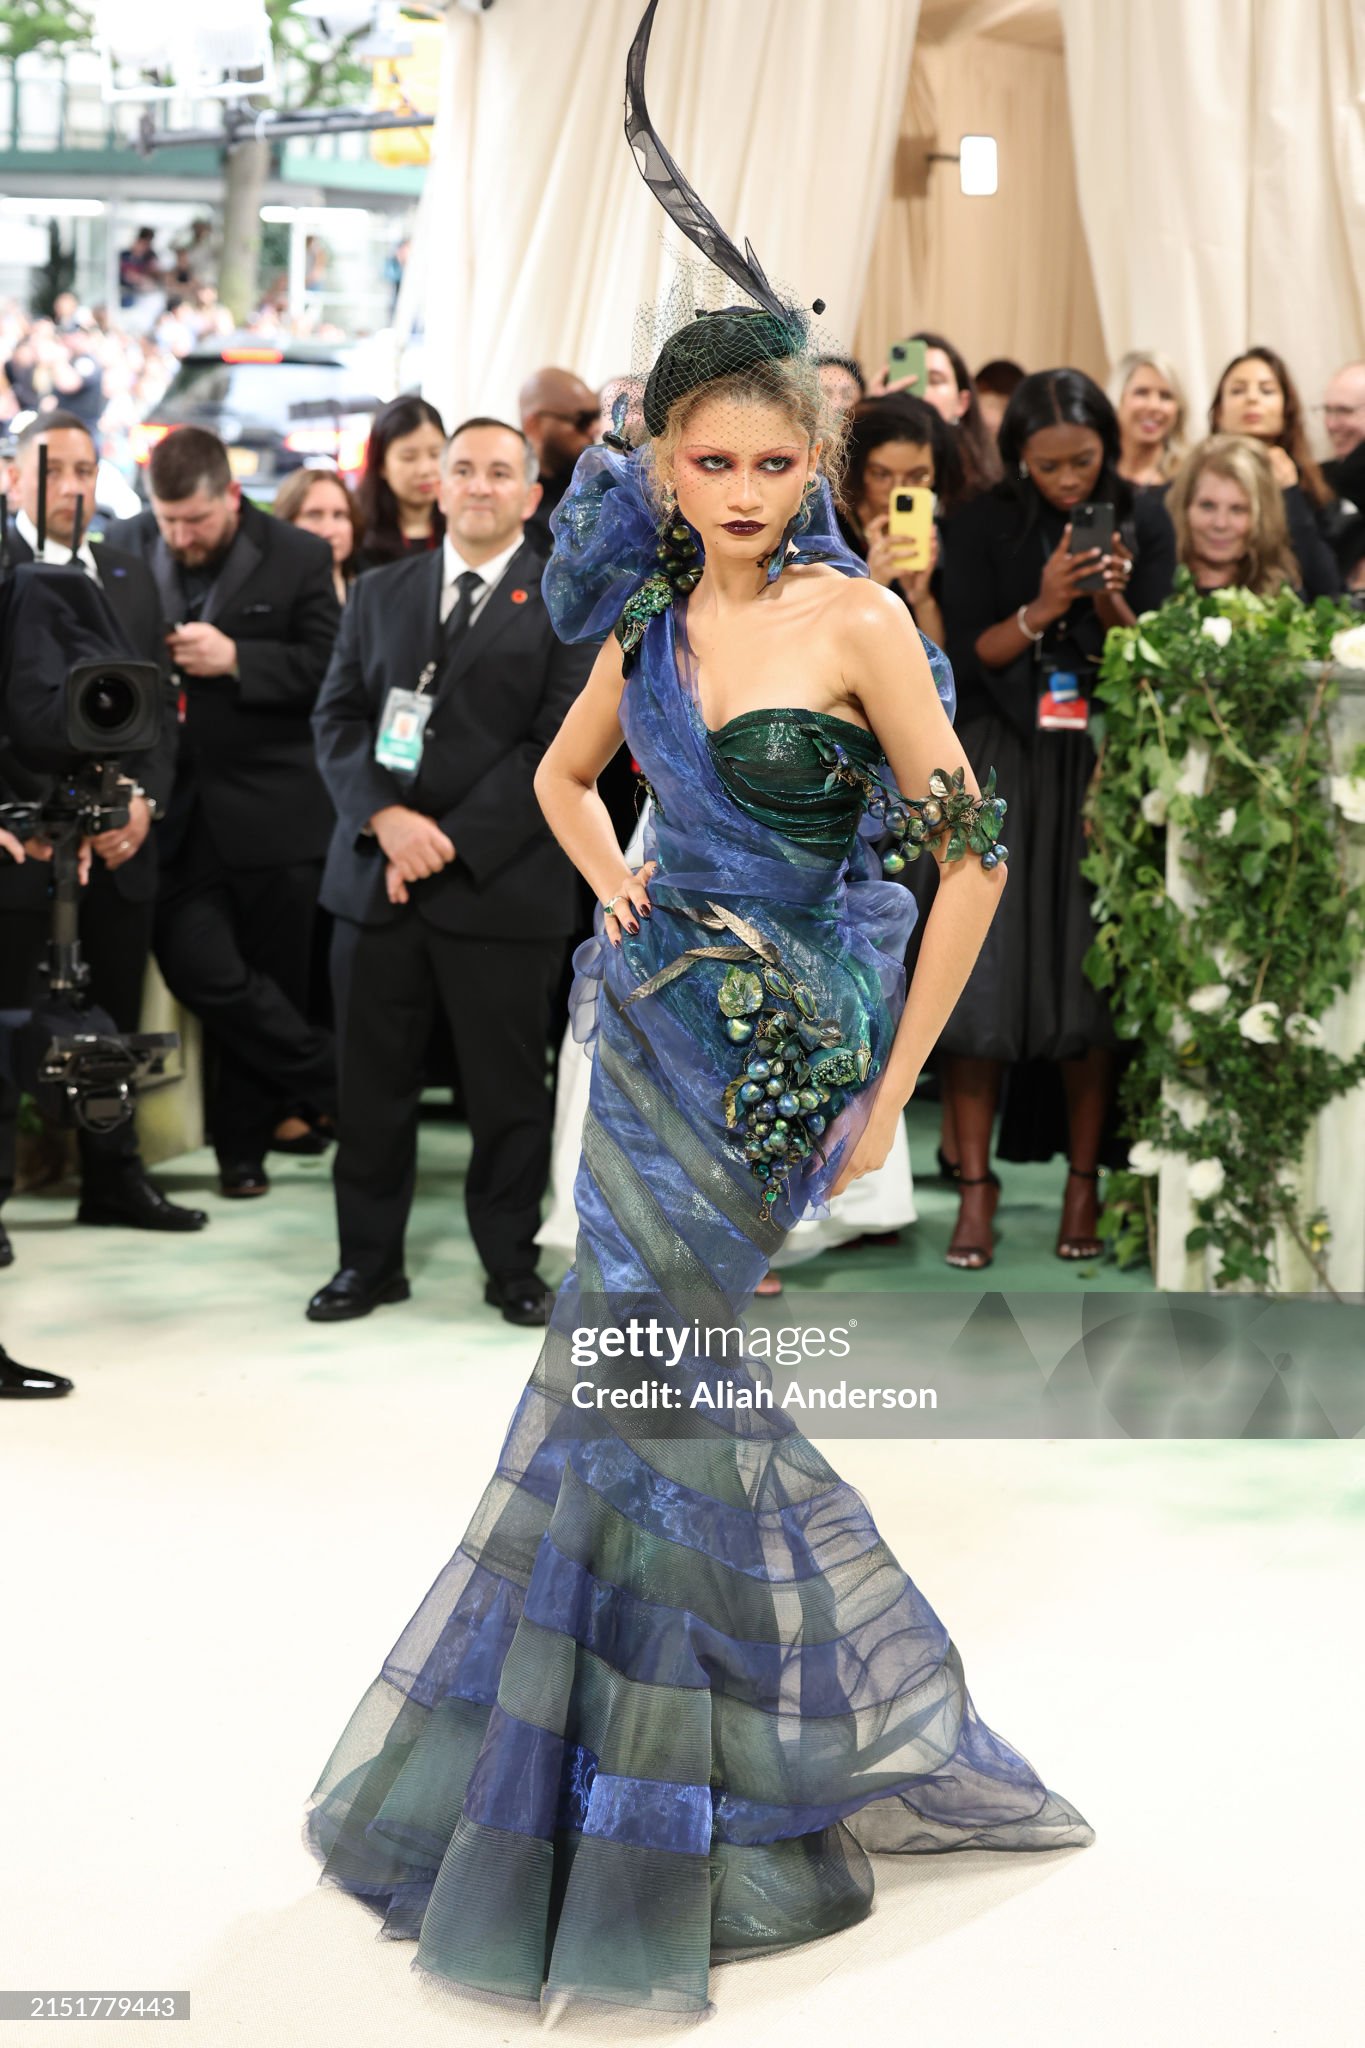 gettyimages-2151779443-2048x2048.jpg